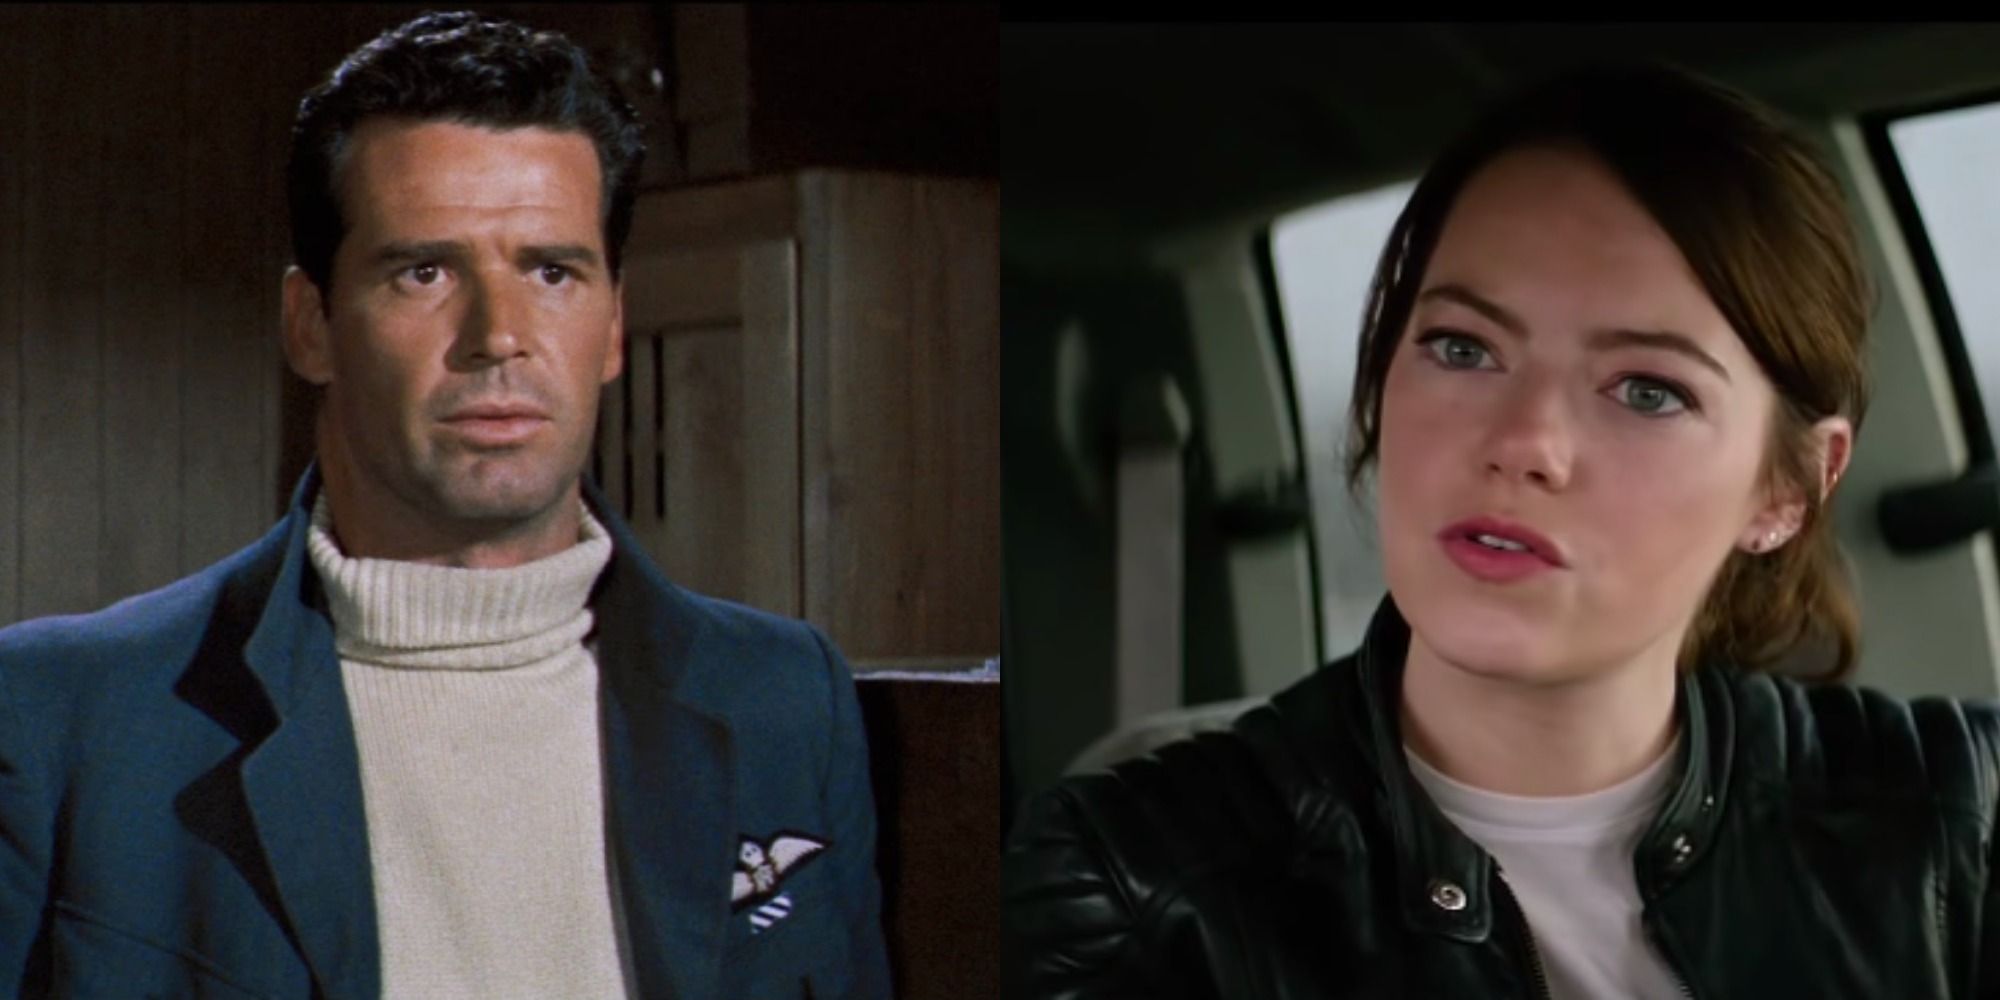 Split image of James Garner in The Great Escape and Emma Stone in Zombieland: Double Tap